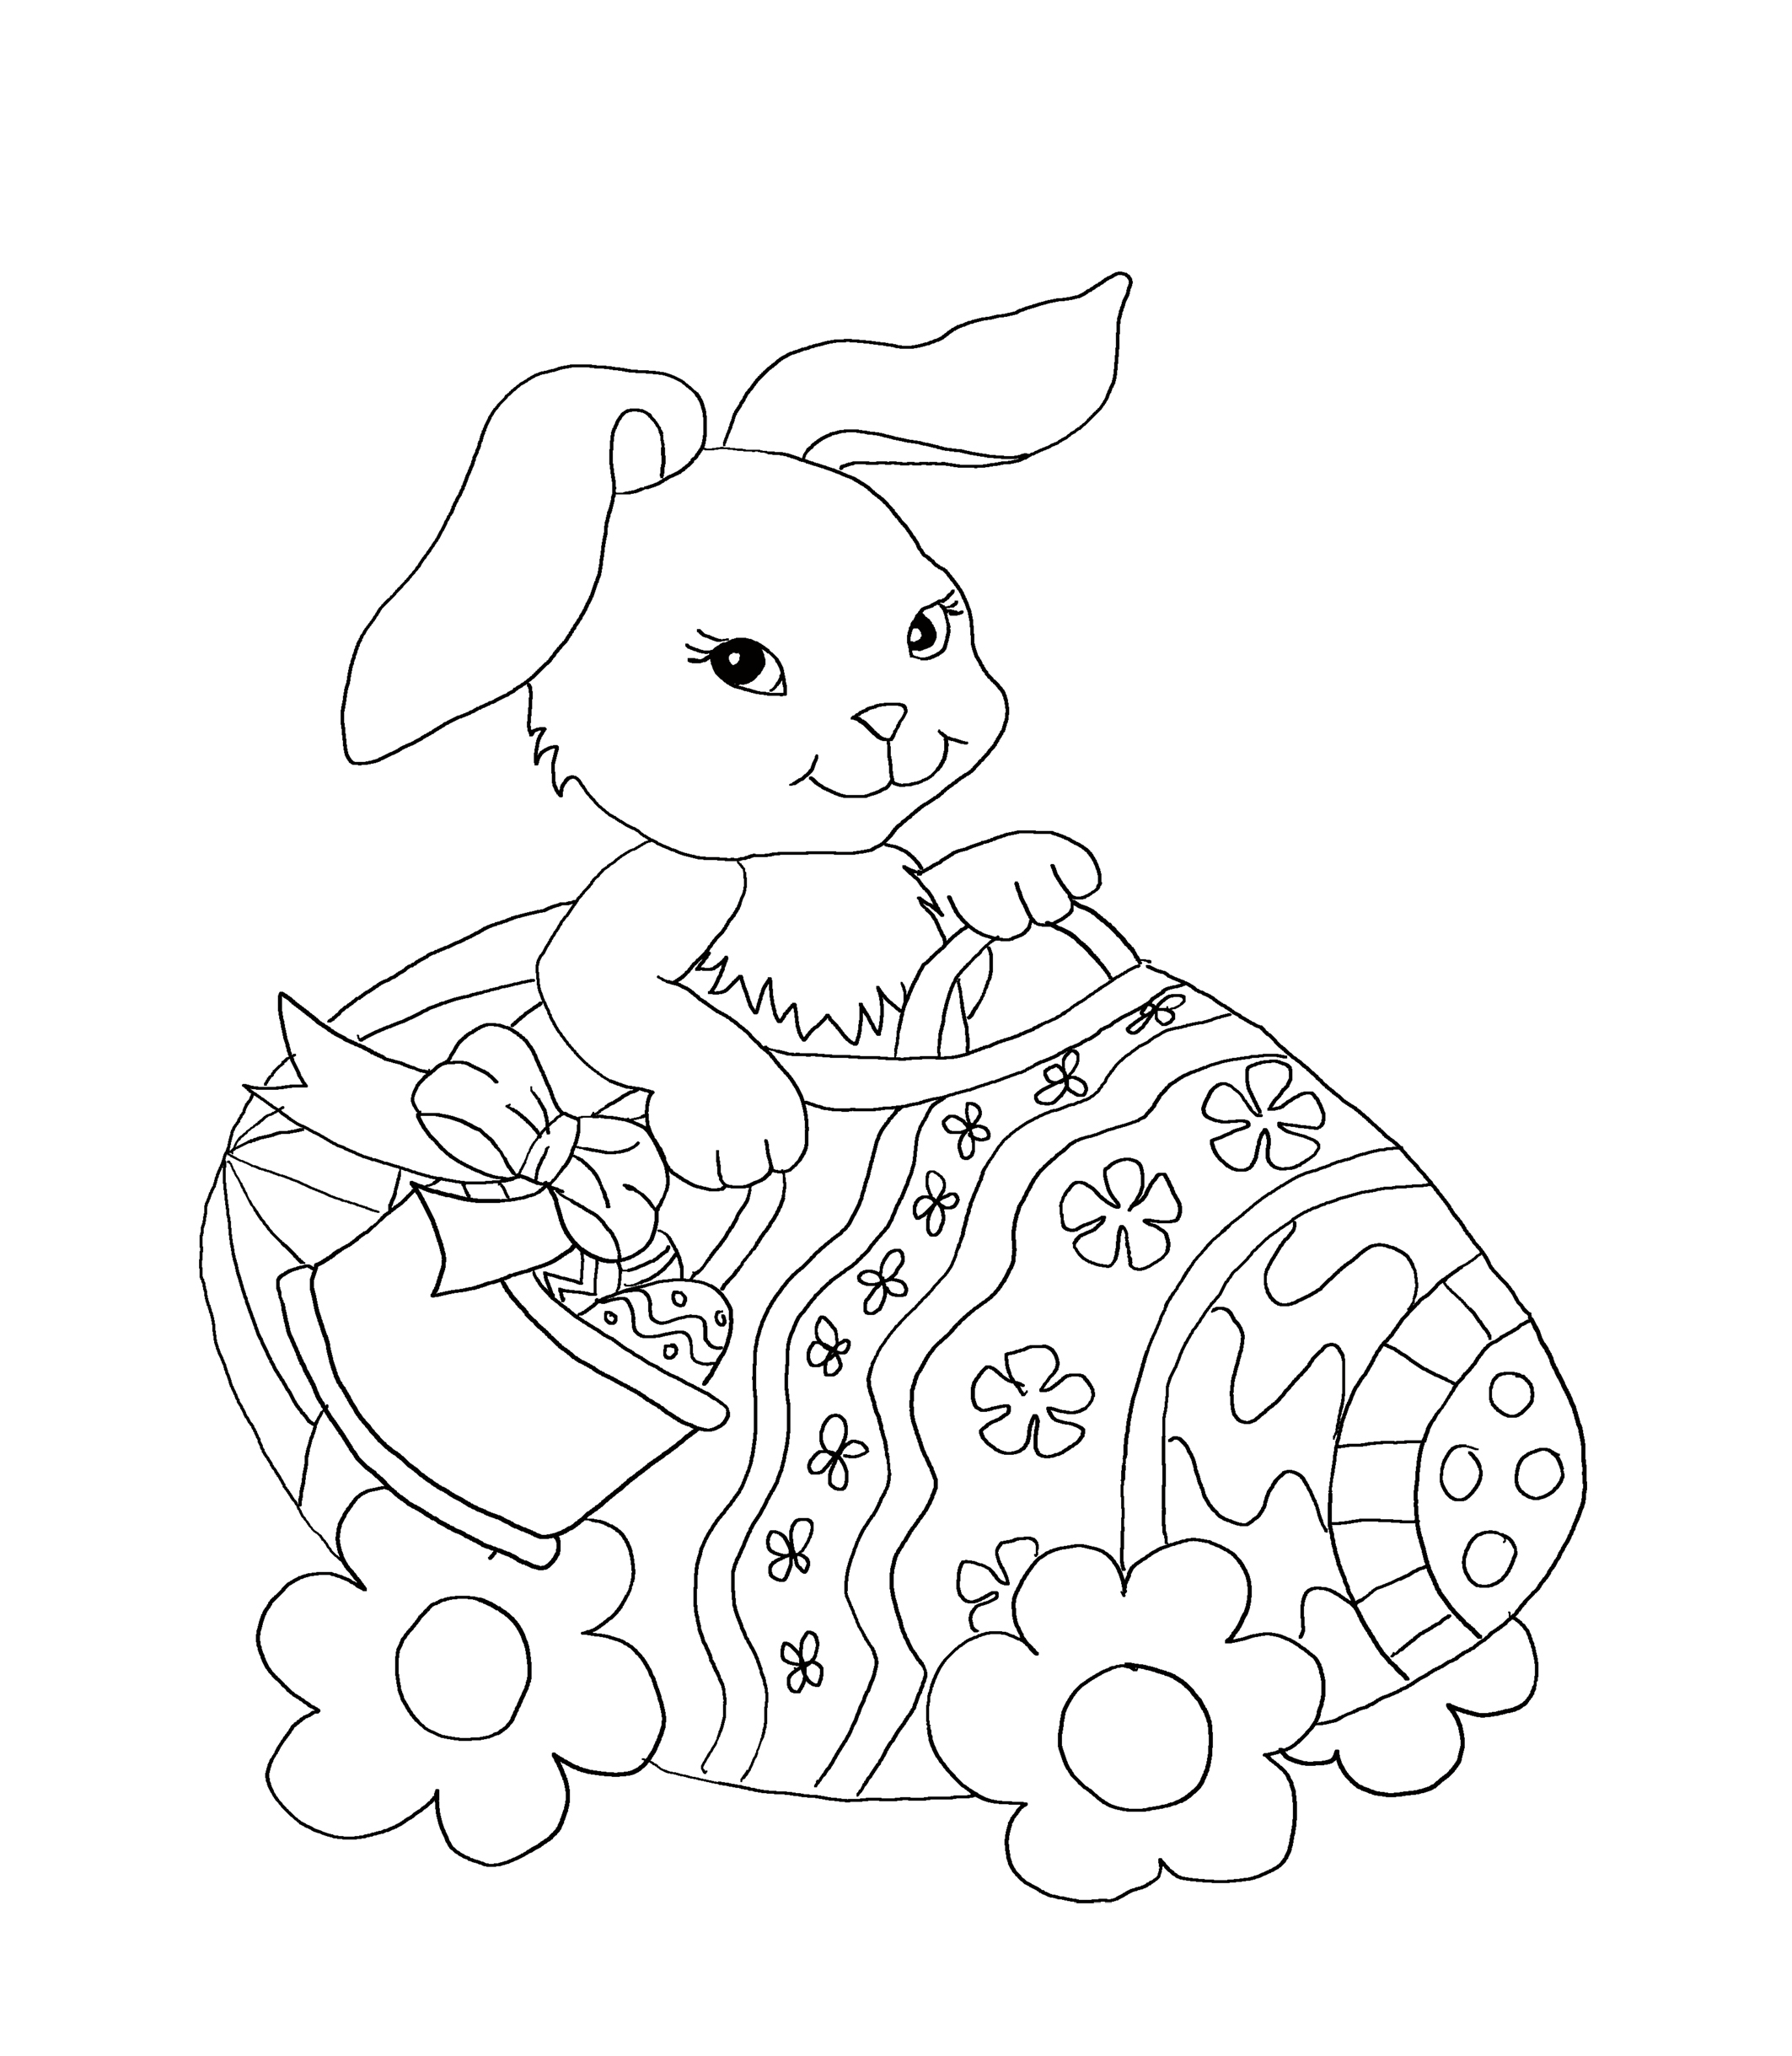 Download Free Easter Coloring Pages For Kids High Printing Quality